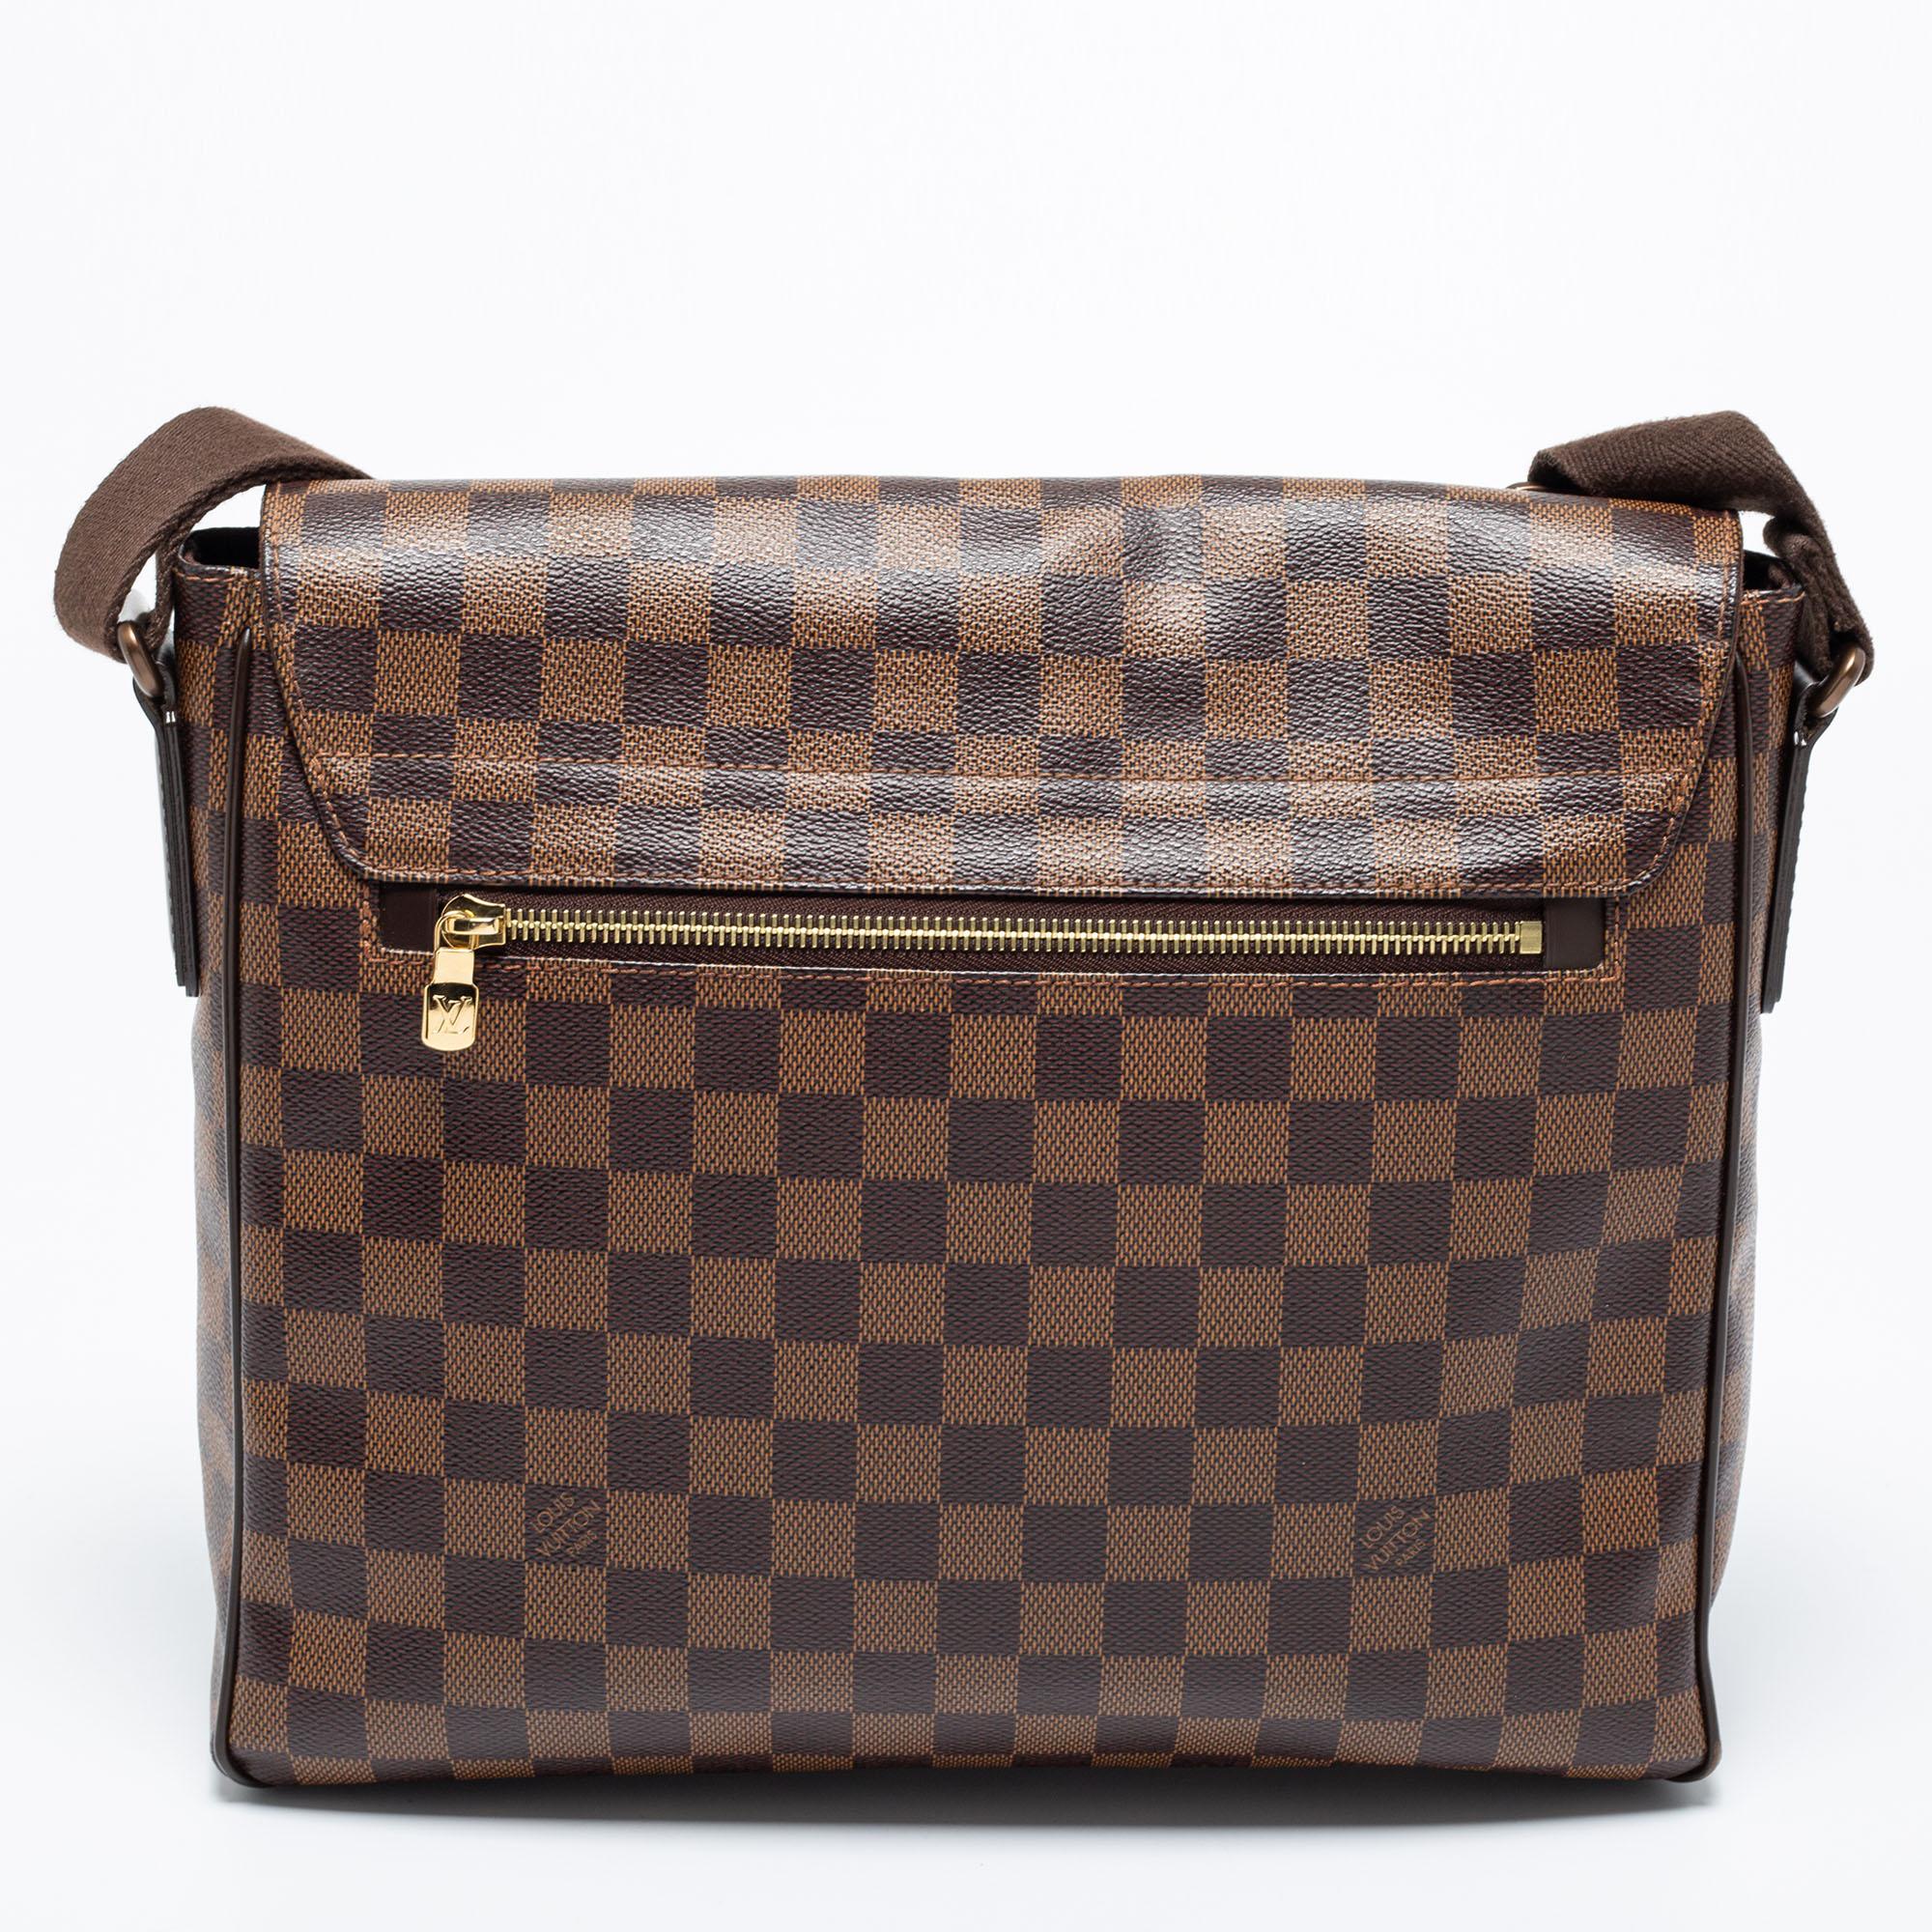 The District MM bag is another utilitarian design from the house of Louis Vuitton. Exuding the label's rich craftsmanship and creativity, the bag is crafted from Damier Ebene canvas into a spacious size. The full flap on the front opens to a